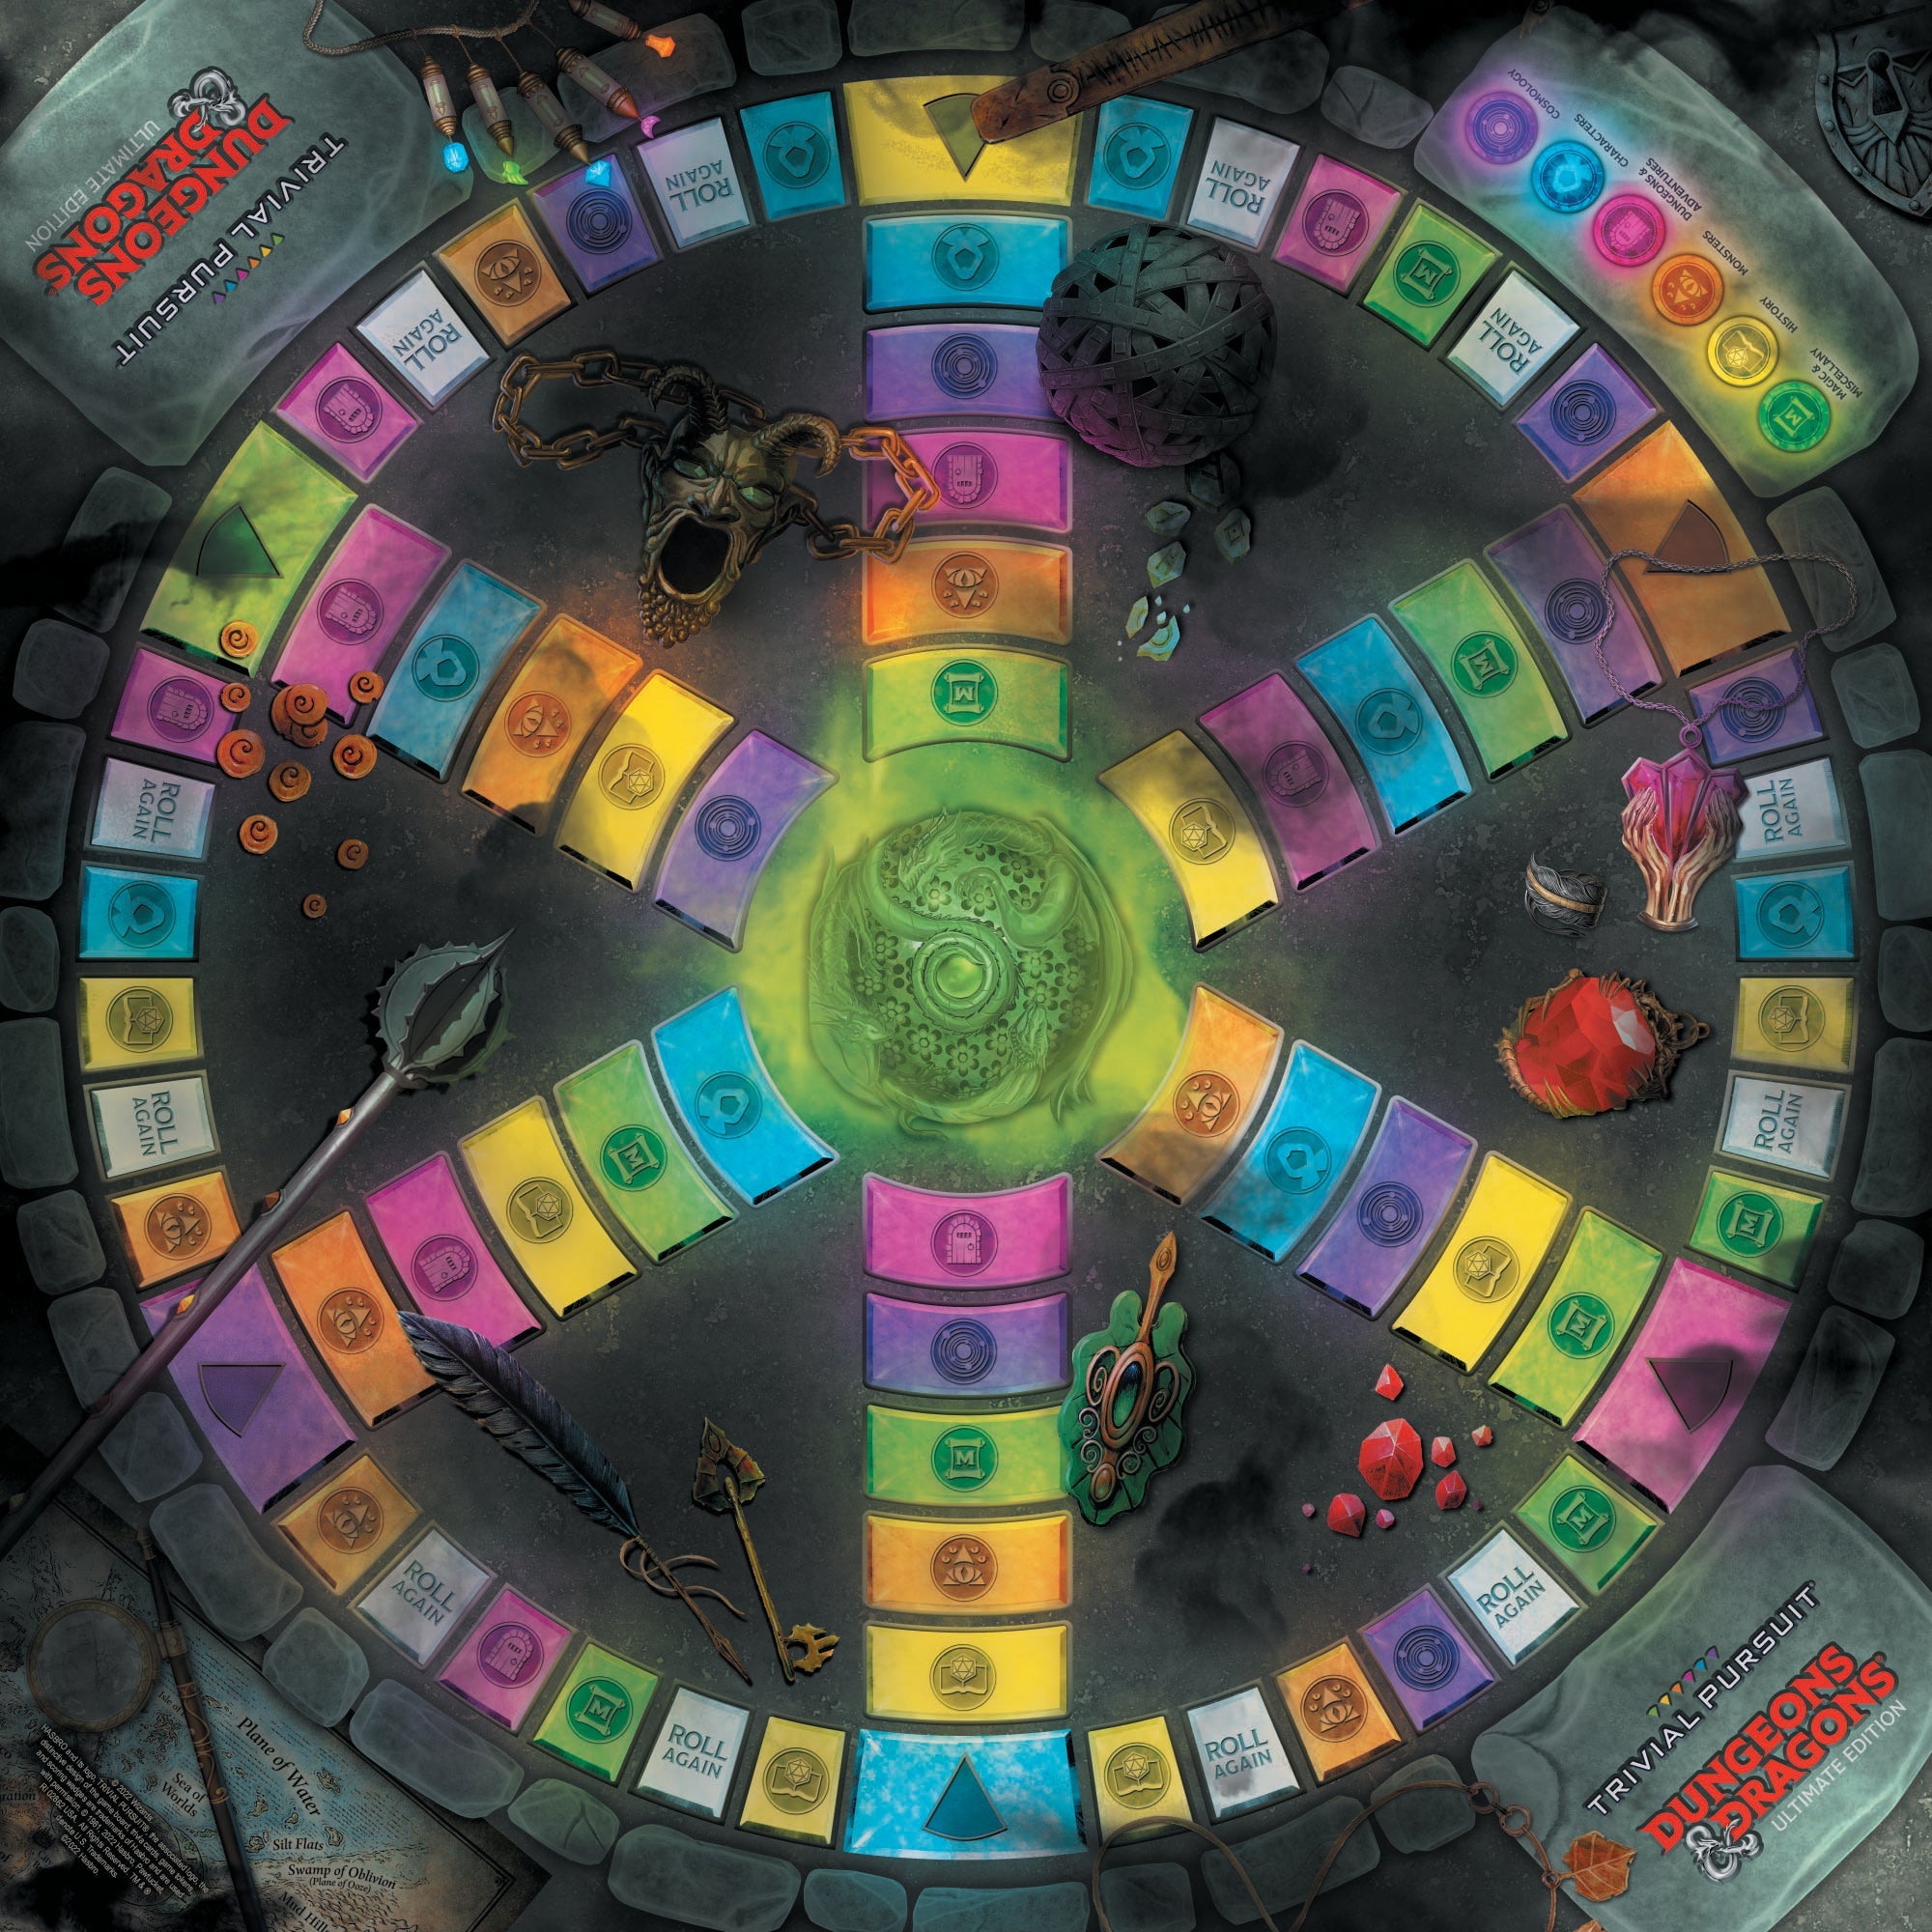 Trivial Pursuit®: Dungeons & Dragons Ultimate Edition - Bards & Cards